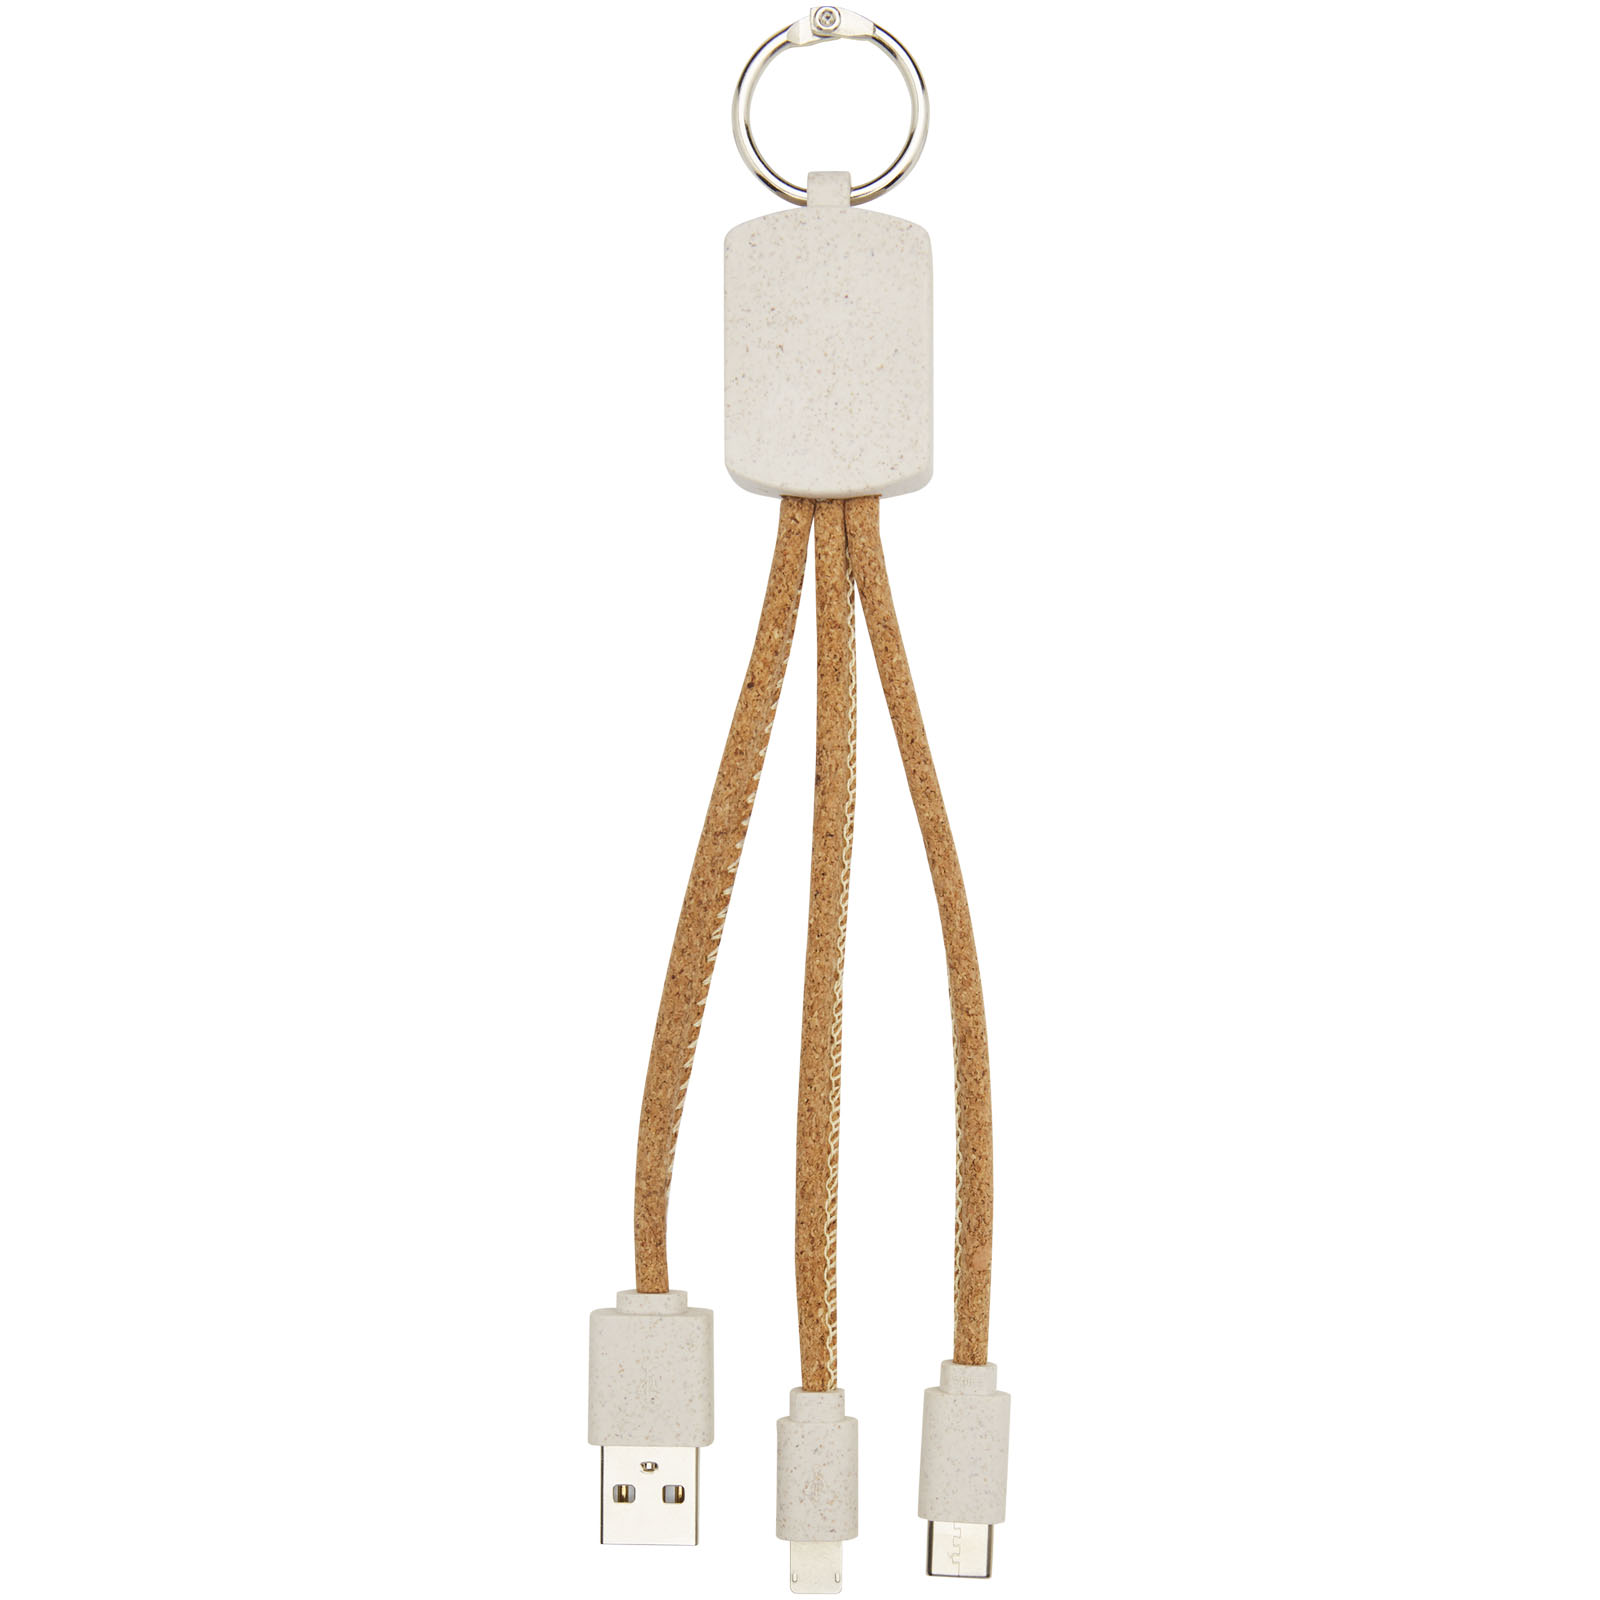 Advertising Cables - Bates wheat straw and cork 3-in-1 charging cable - 3